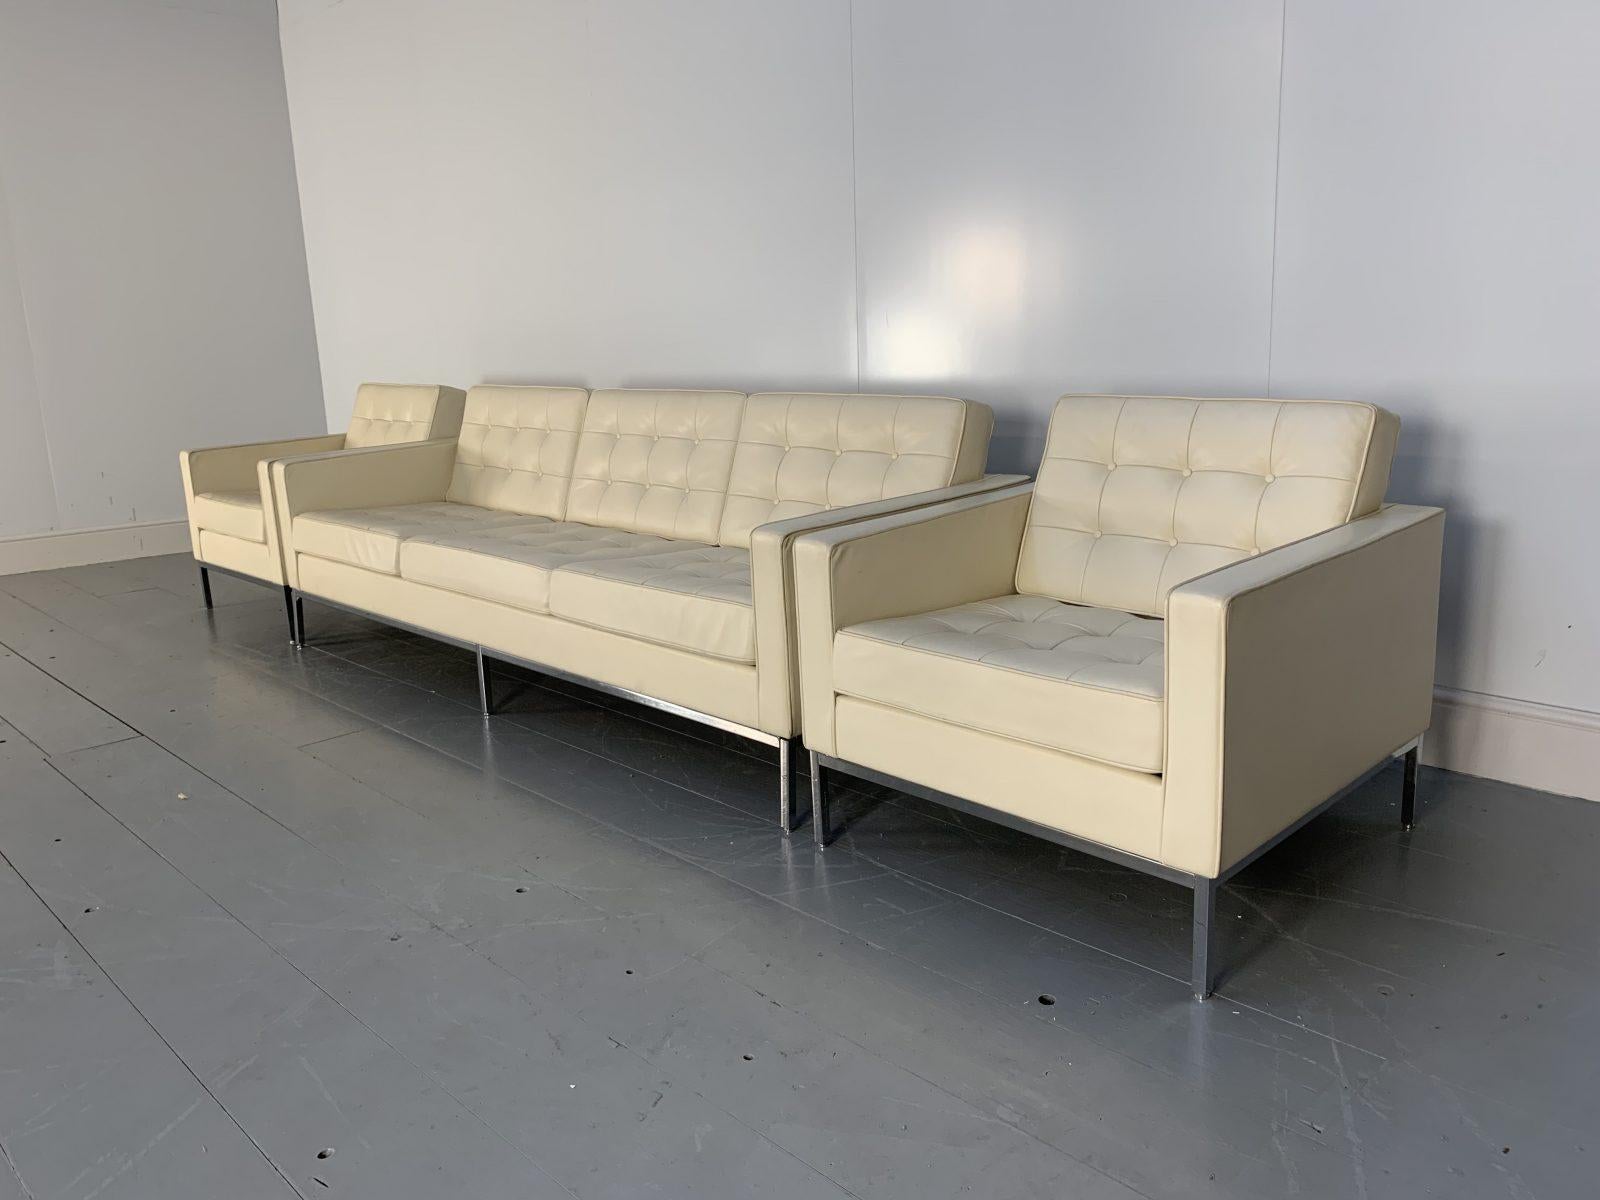 Knoll Studio “Florence Knoll Relax” Sofa & 2 Armchair Suite in “Volo” Leather For Sale 3